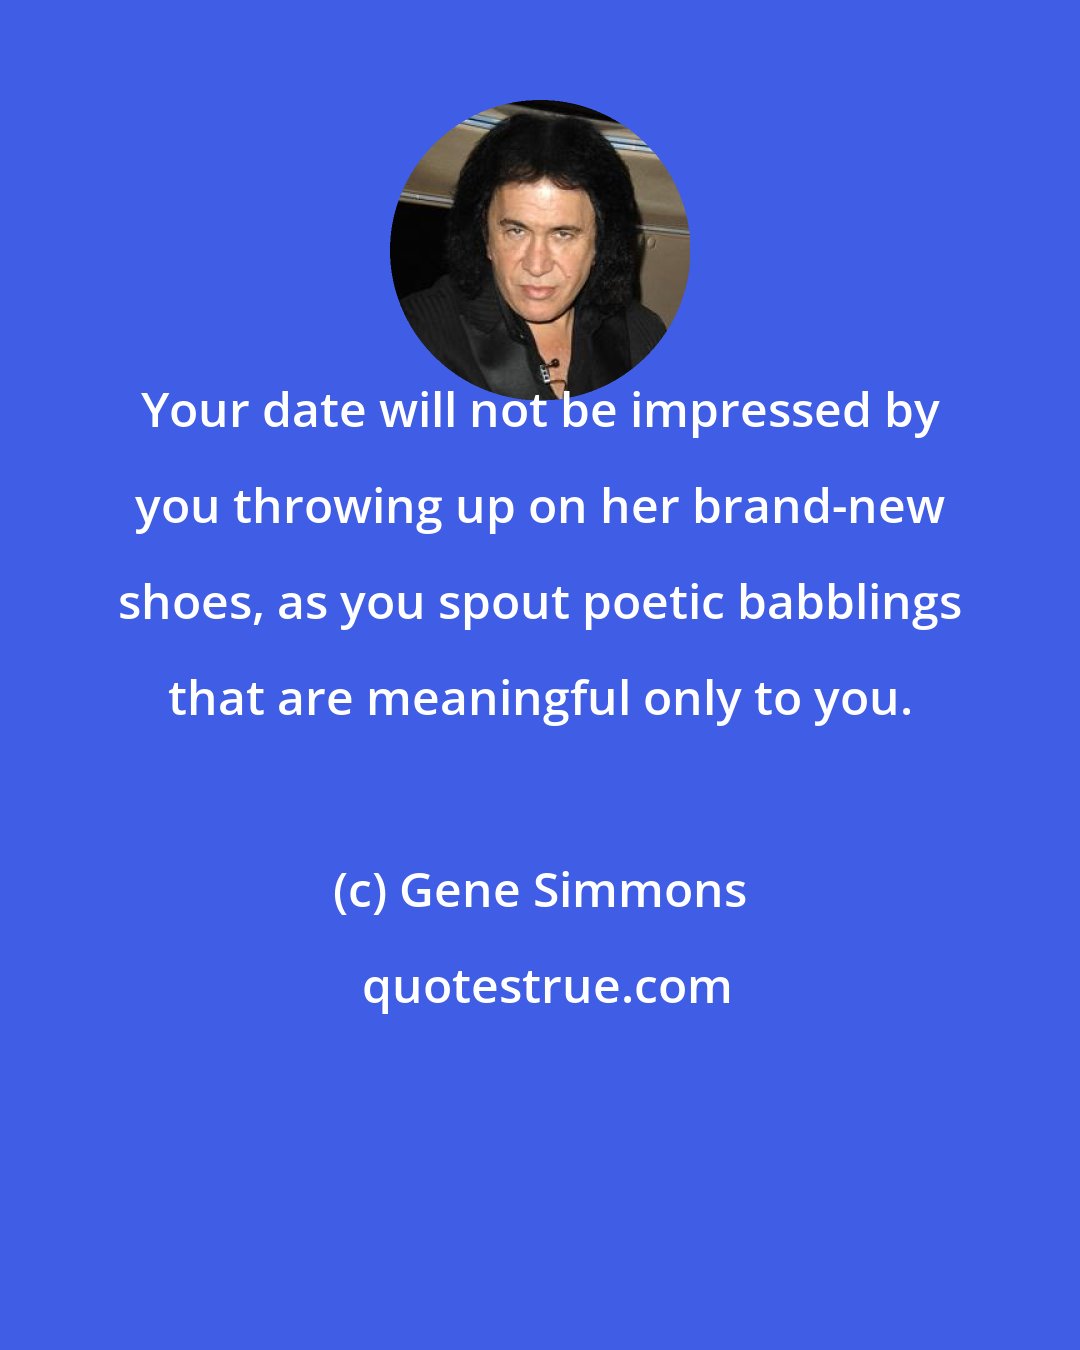 Gene Simmons: Your date will not be impressed by you throwing up on her brand-new shoes, as you spout poetic babblings that are meaningful only to you.